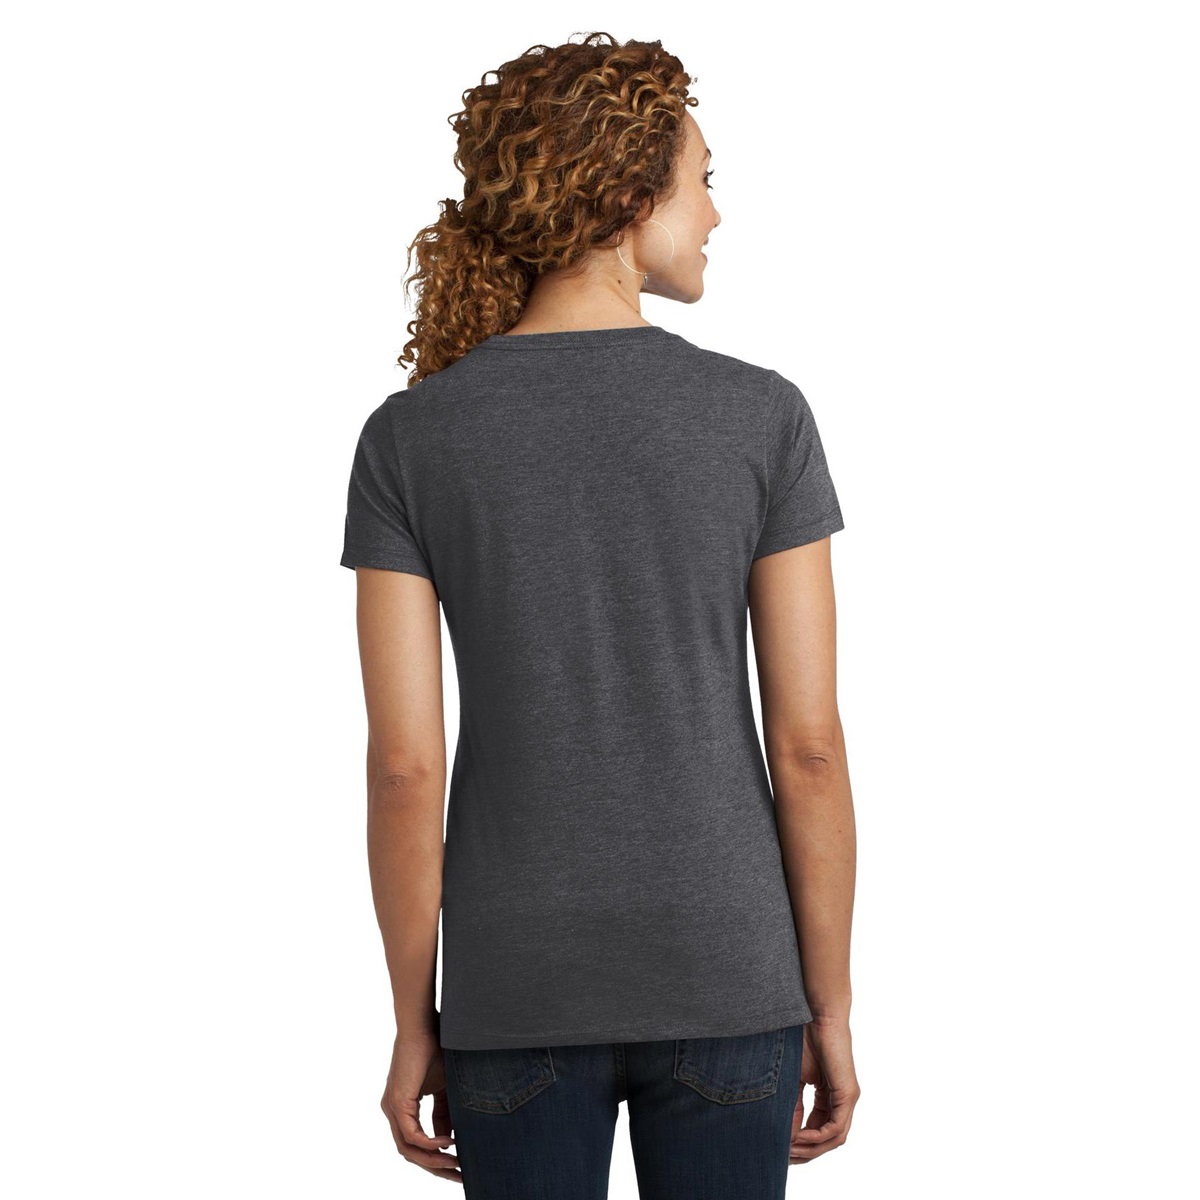 District Made DM108L Ladies Perfect Blend Crew Tee - Heathered Charcoal ...